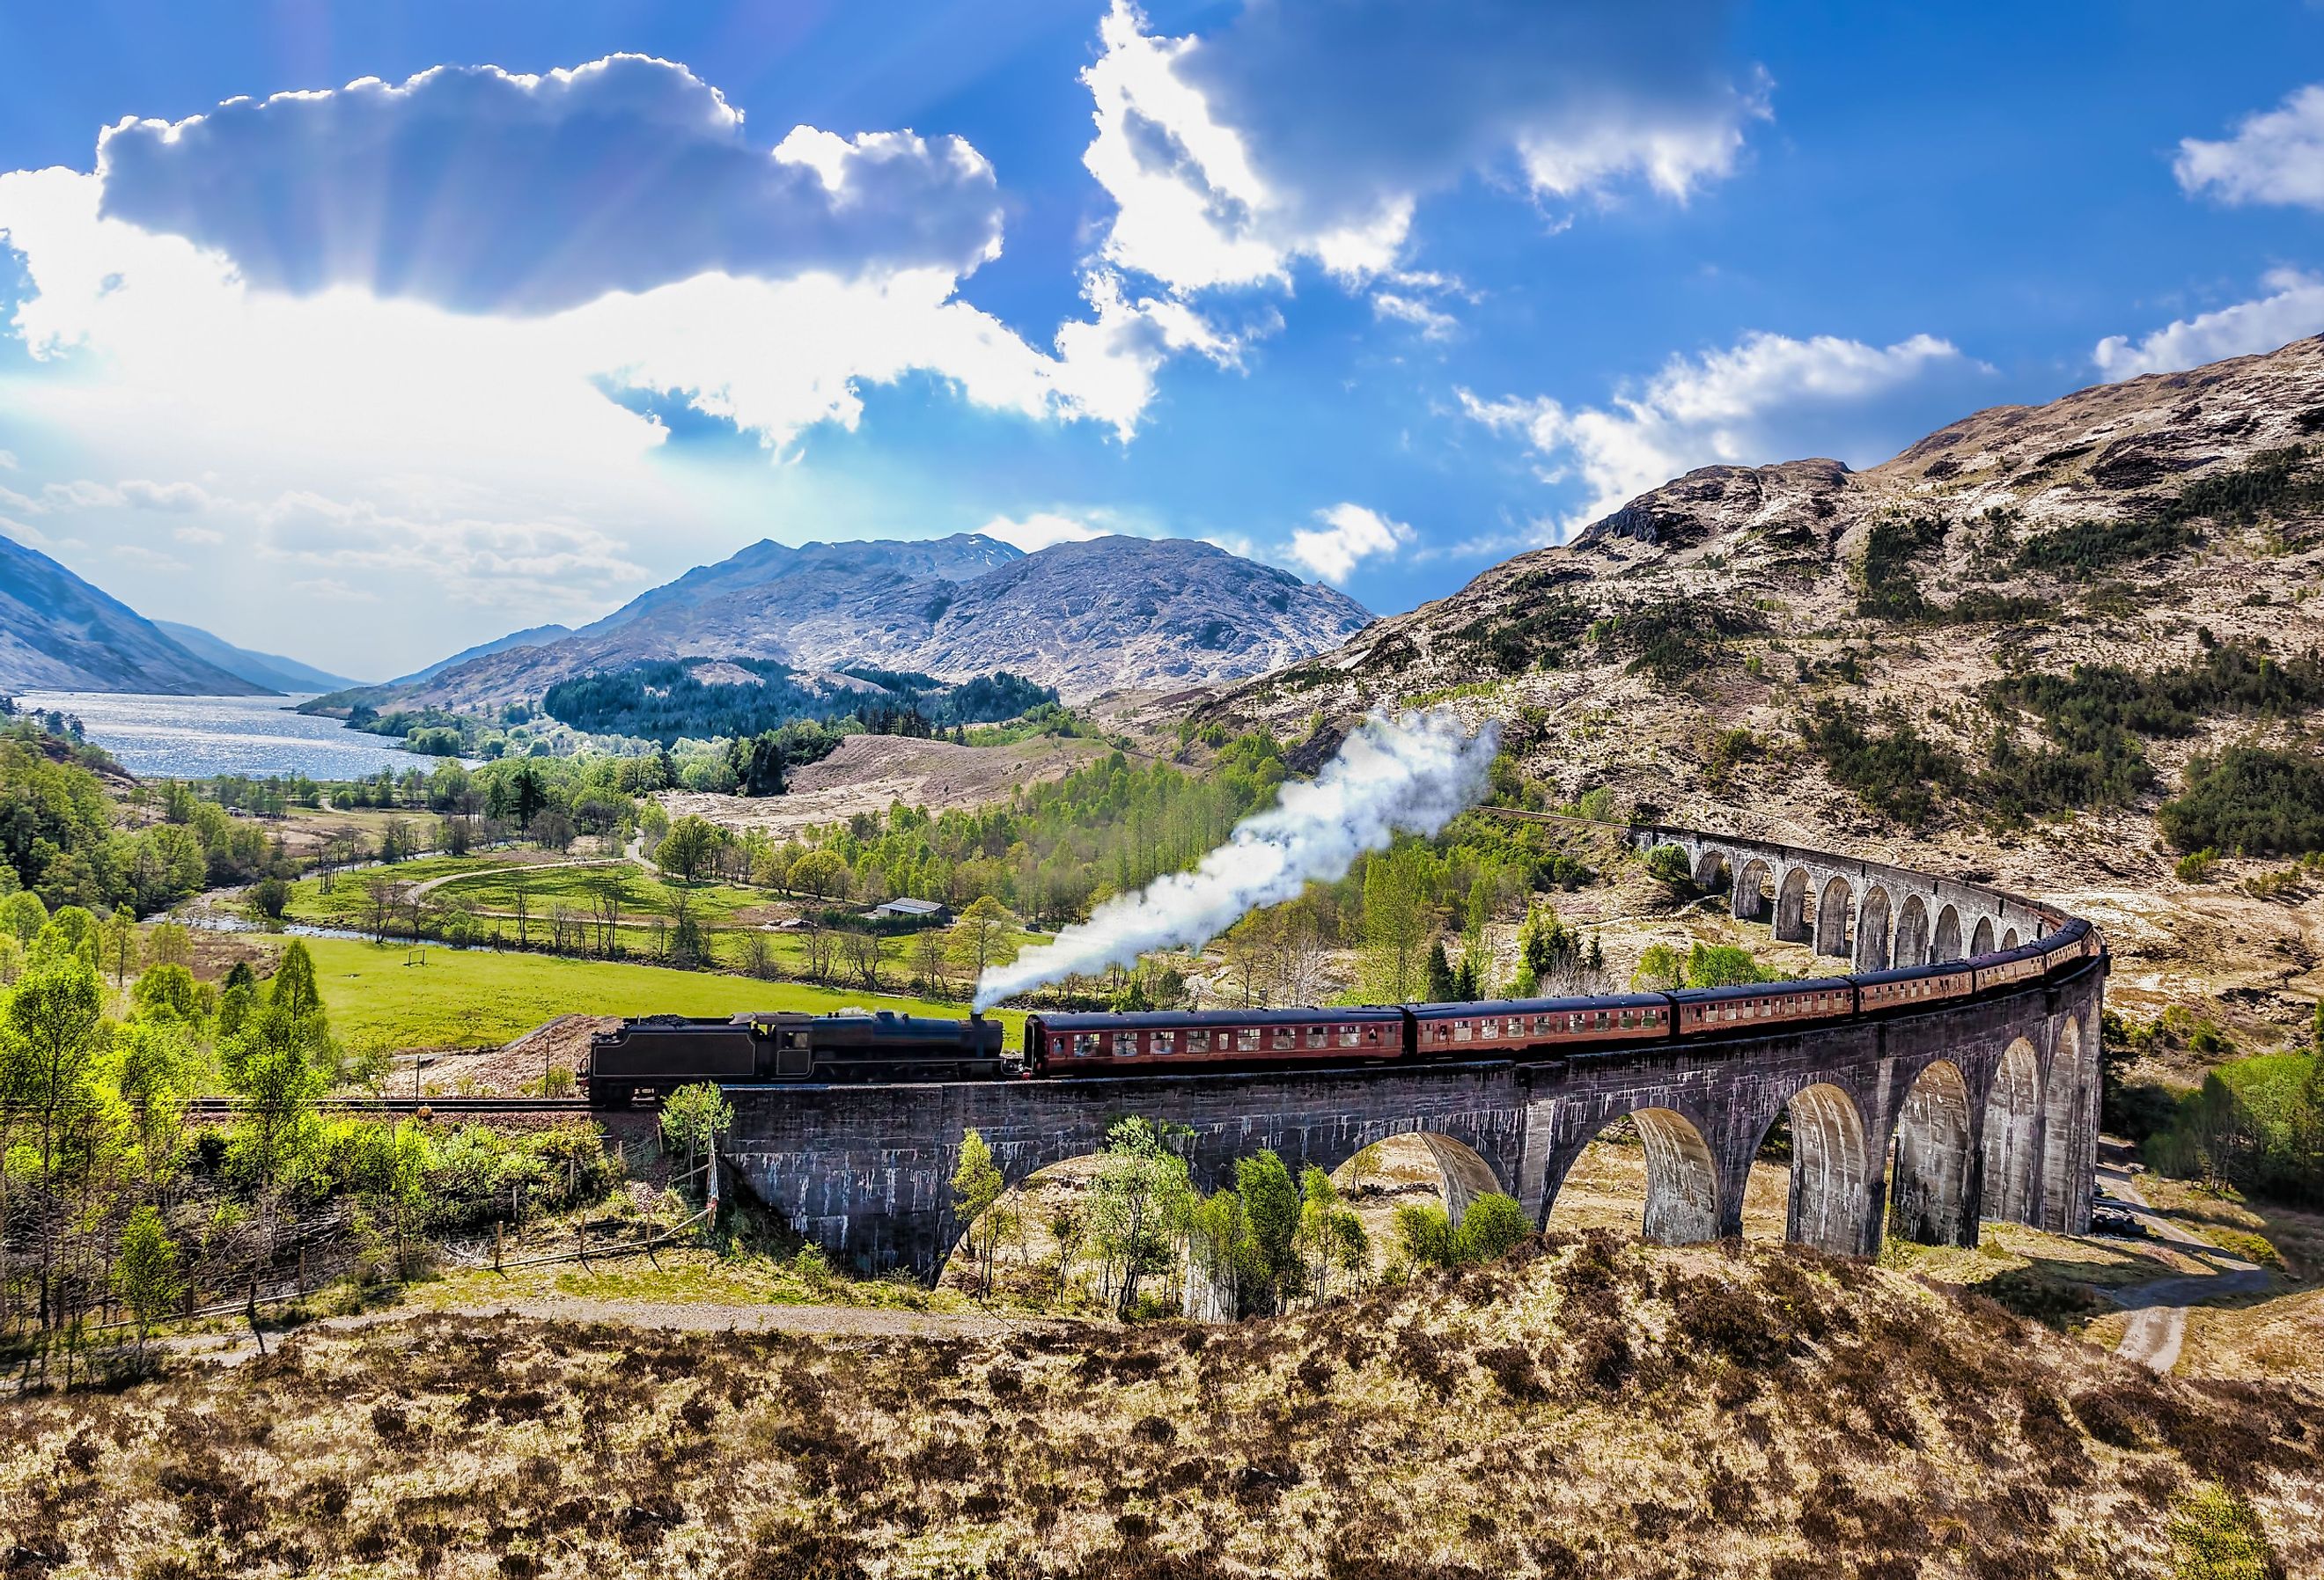 Glenfinnan Railway Viaduct in Scotland with the Jacobite steam train against sunset over lake. Image credit: Tomas Marek via Shutterstock